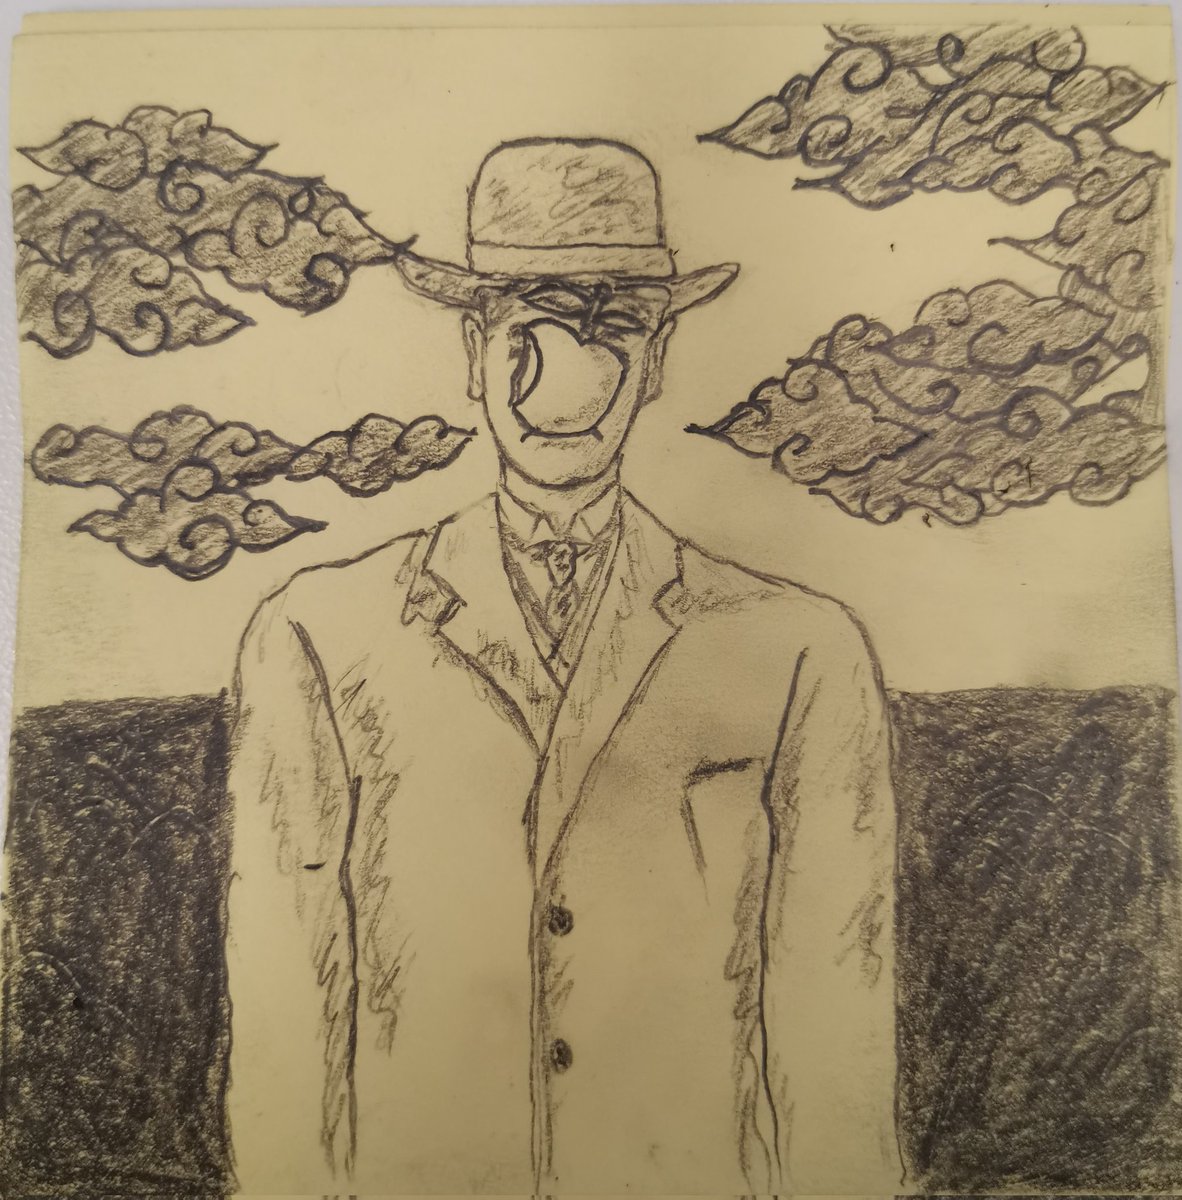 Apple from the abyss

Full collection on instagram.com/little.yellow.…

#art #artist #littleyellowpaper #postit #drawing #Pencil #sketches #hongkong #hk #artlover #selftaughtartist #rene #renemagritte #magritte #surrealism #apple #abyss #man #faceoff